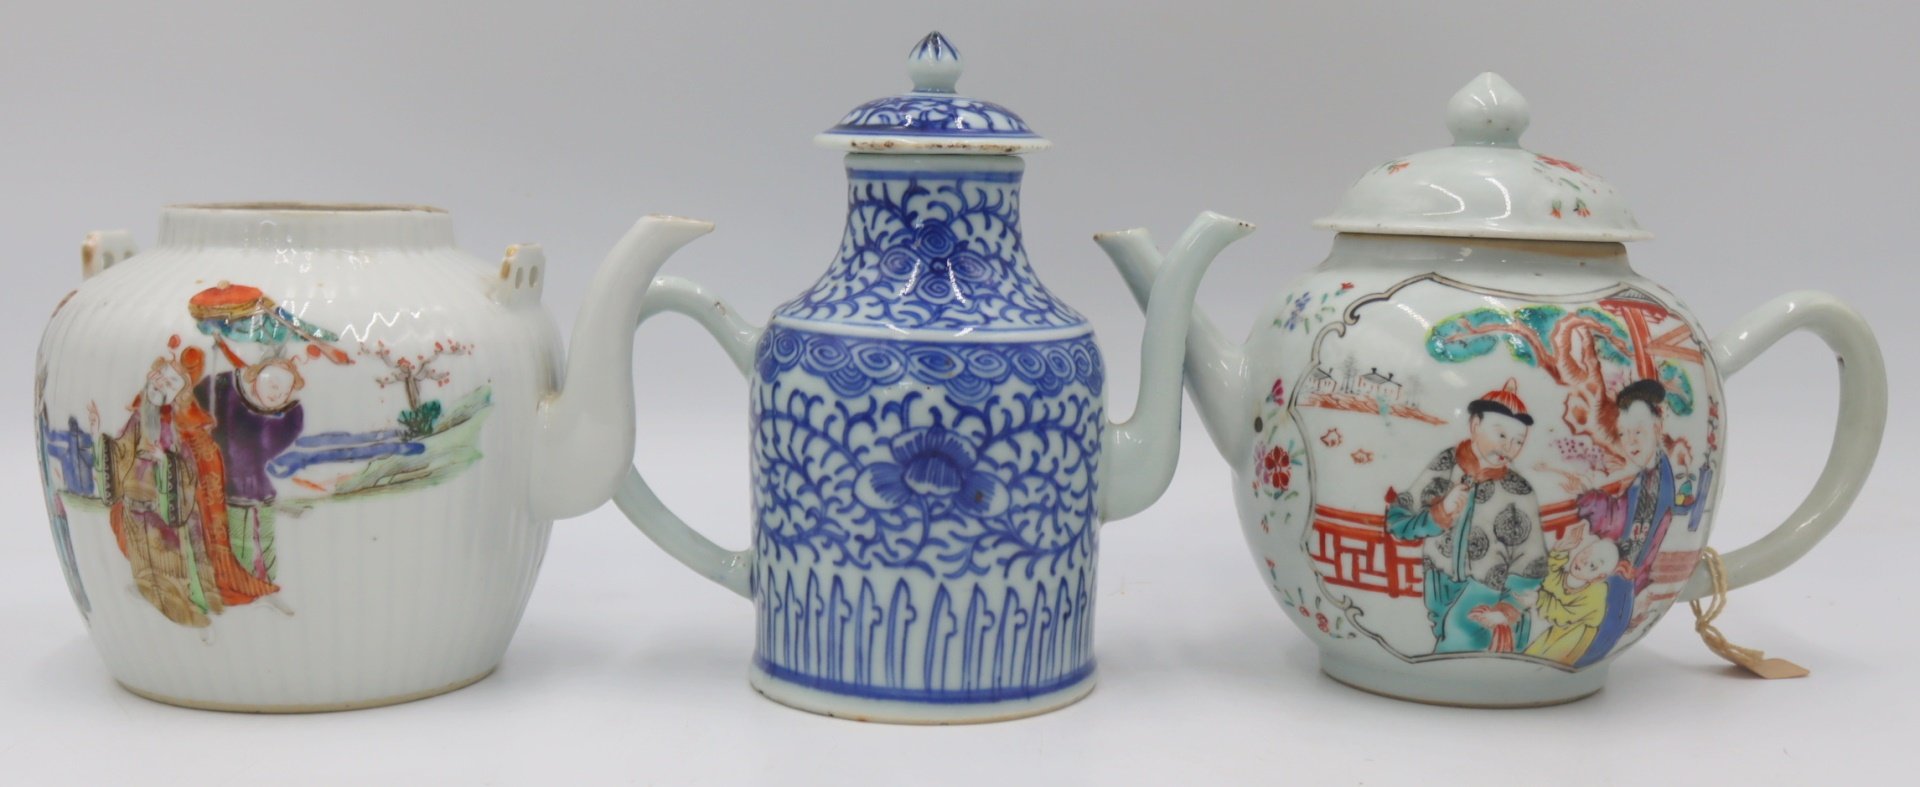 CHINESE PORCELAIN TEAPOT COLLECTION  30b864